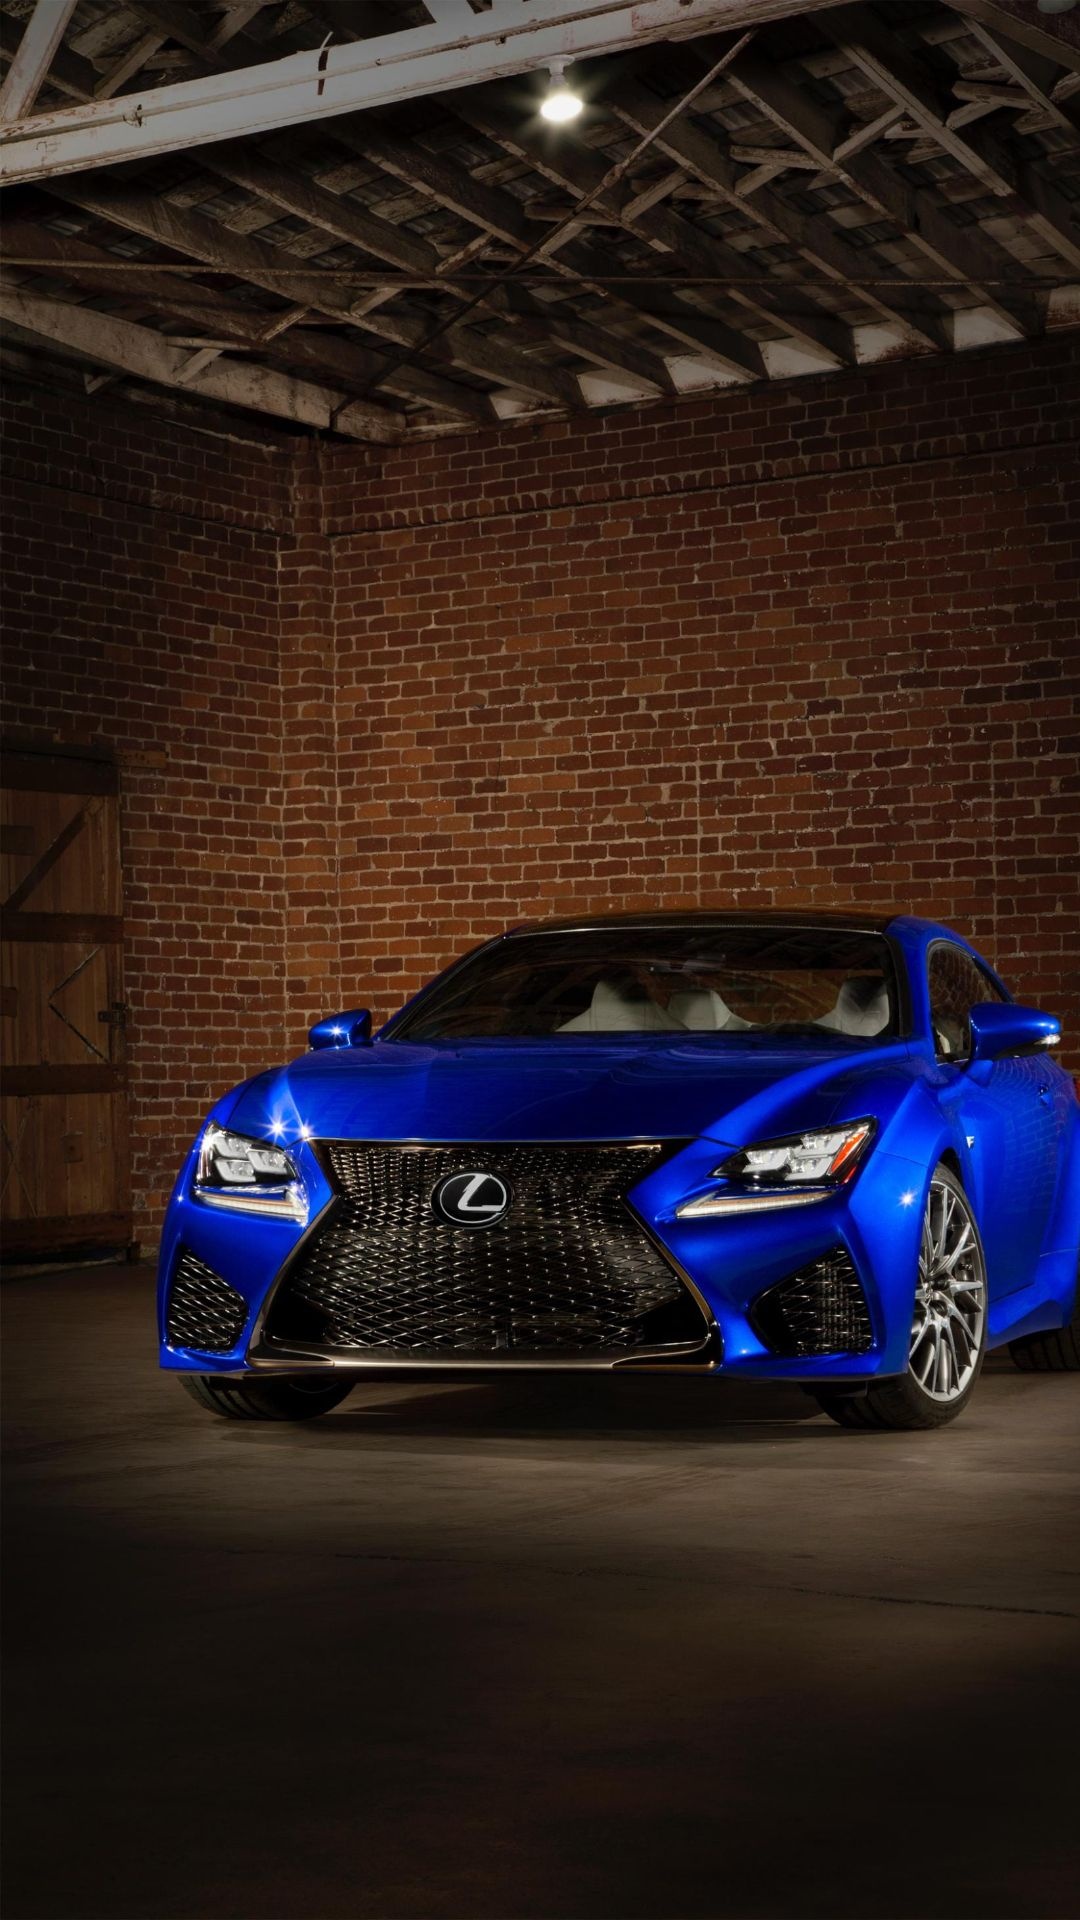 Lexus RC, Auto luxury, Top backgrounds, Stunning images, 1080x1920 Full HD Phone